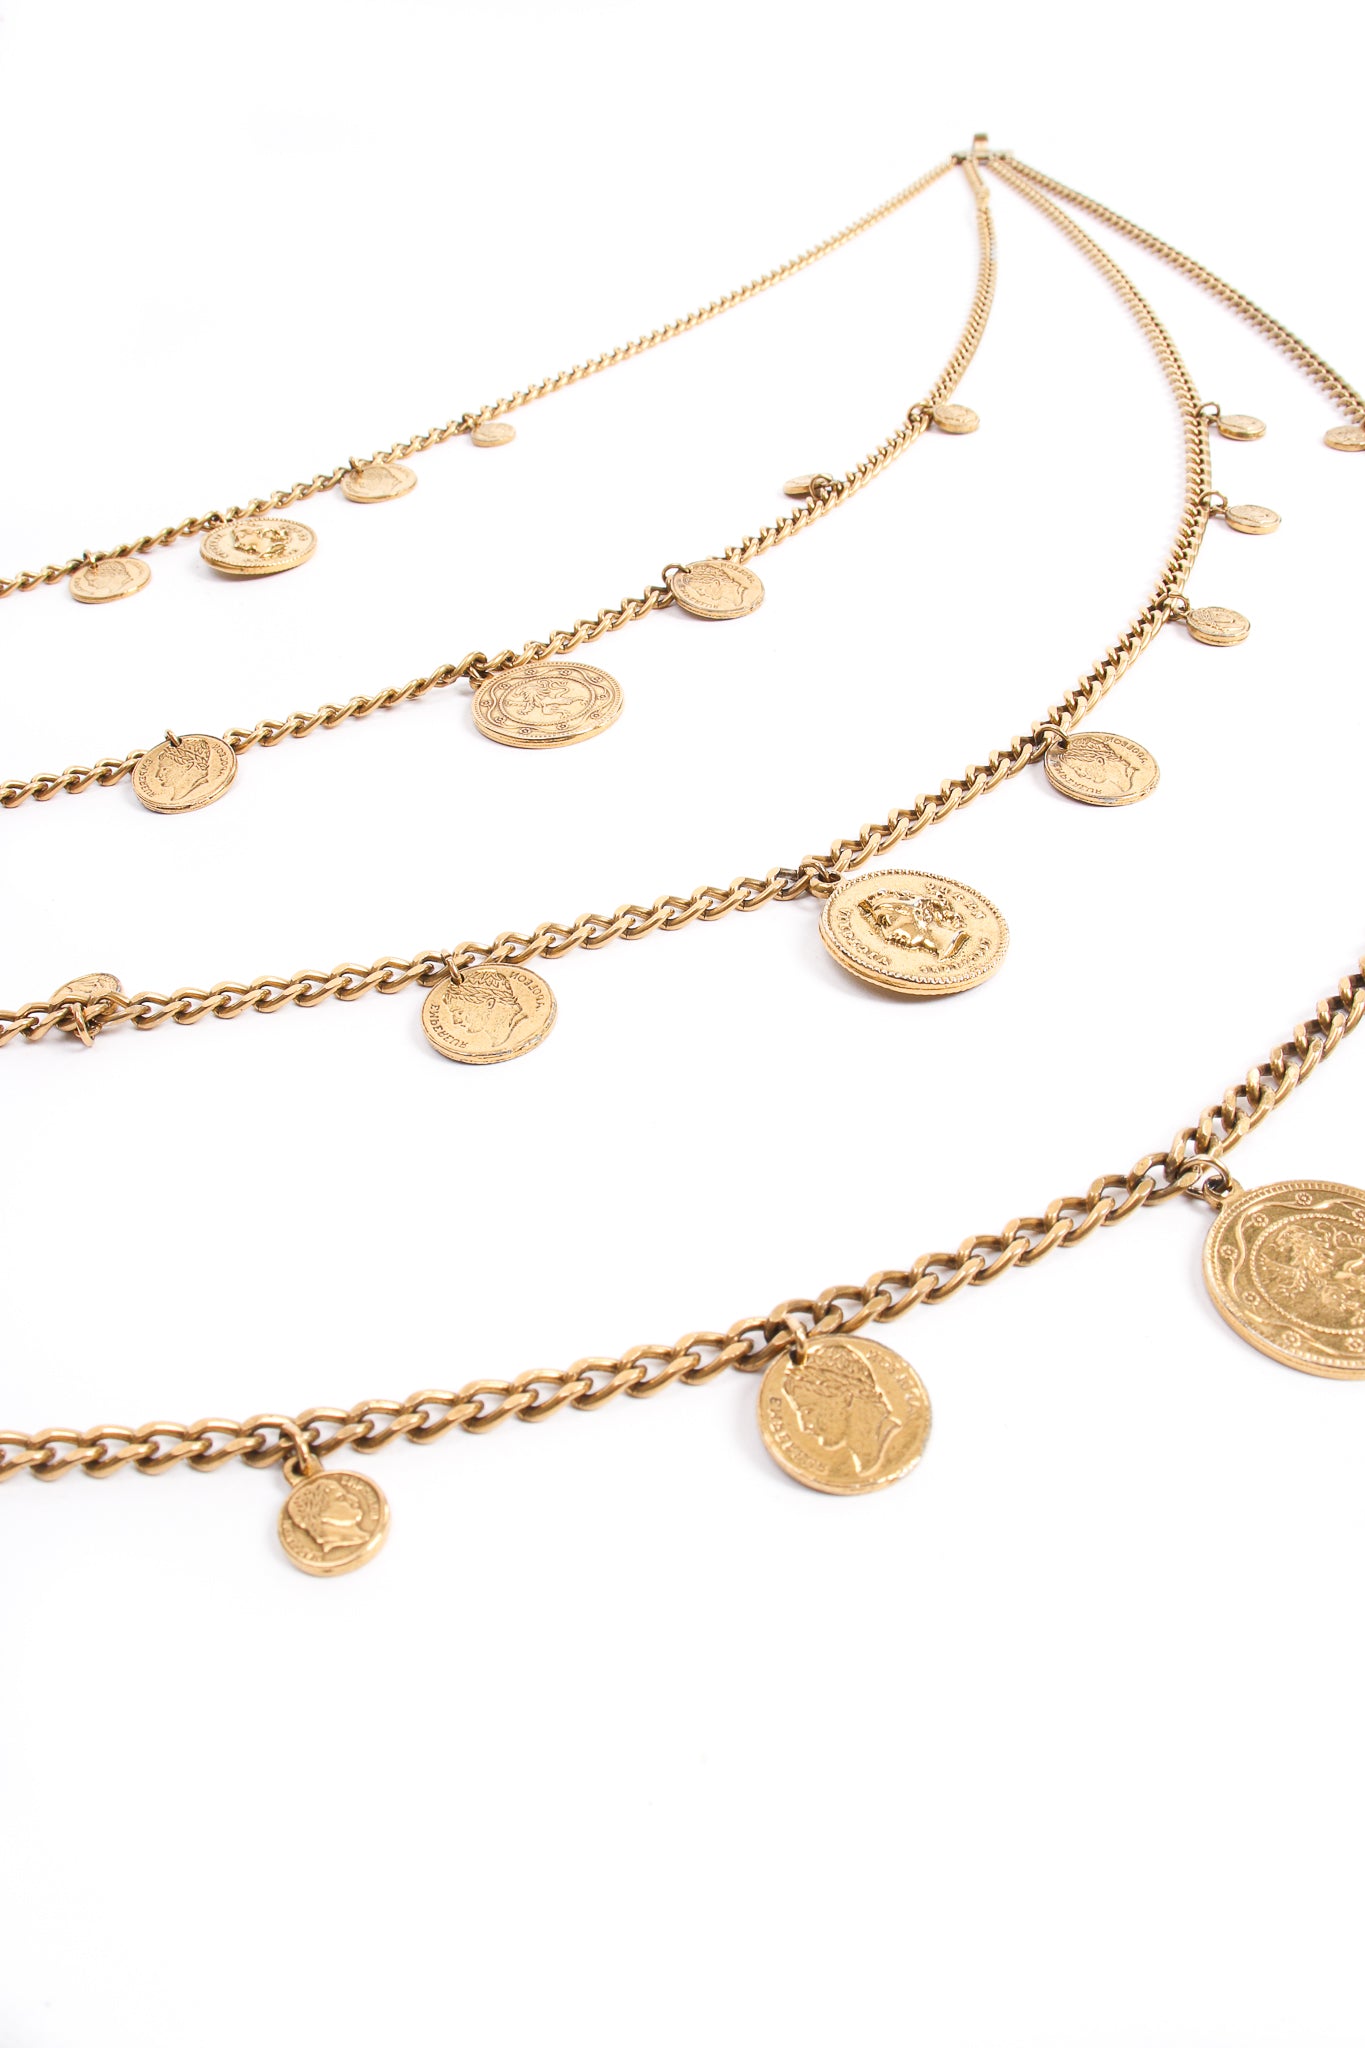 Vintage Goldette Multi-Strand Layered Coin Necklace at Recess Los Angeles